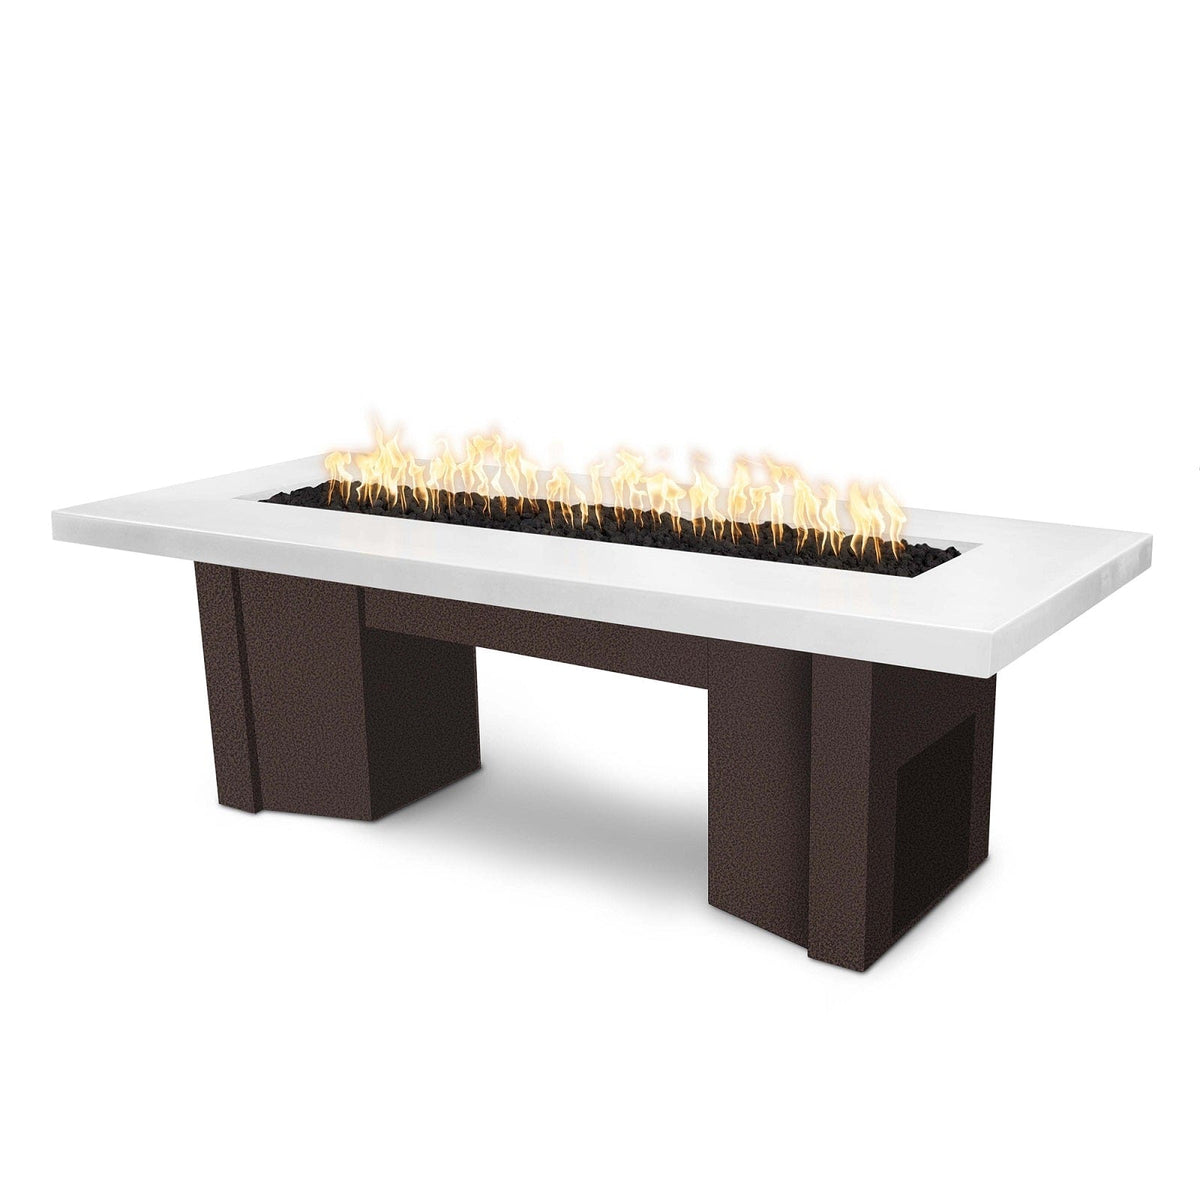 The Outdoor Plus Fire Features Limestone (-LIM) / Copper Vein Powder Coated Steel (-CPV) The Outdoor Plus 78&quot; Alameda Fire Table Smooth Concrete in Liquid Propane - 110V Plug &amp; Play Electronic Ignition / OPT-ALMGFRC78EKIT-LP